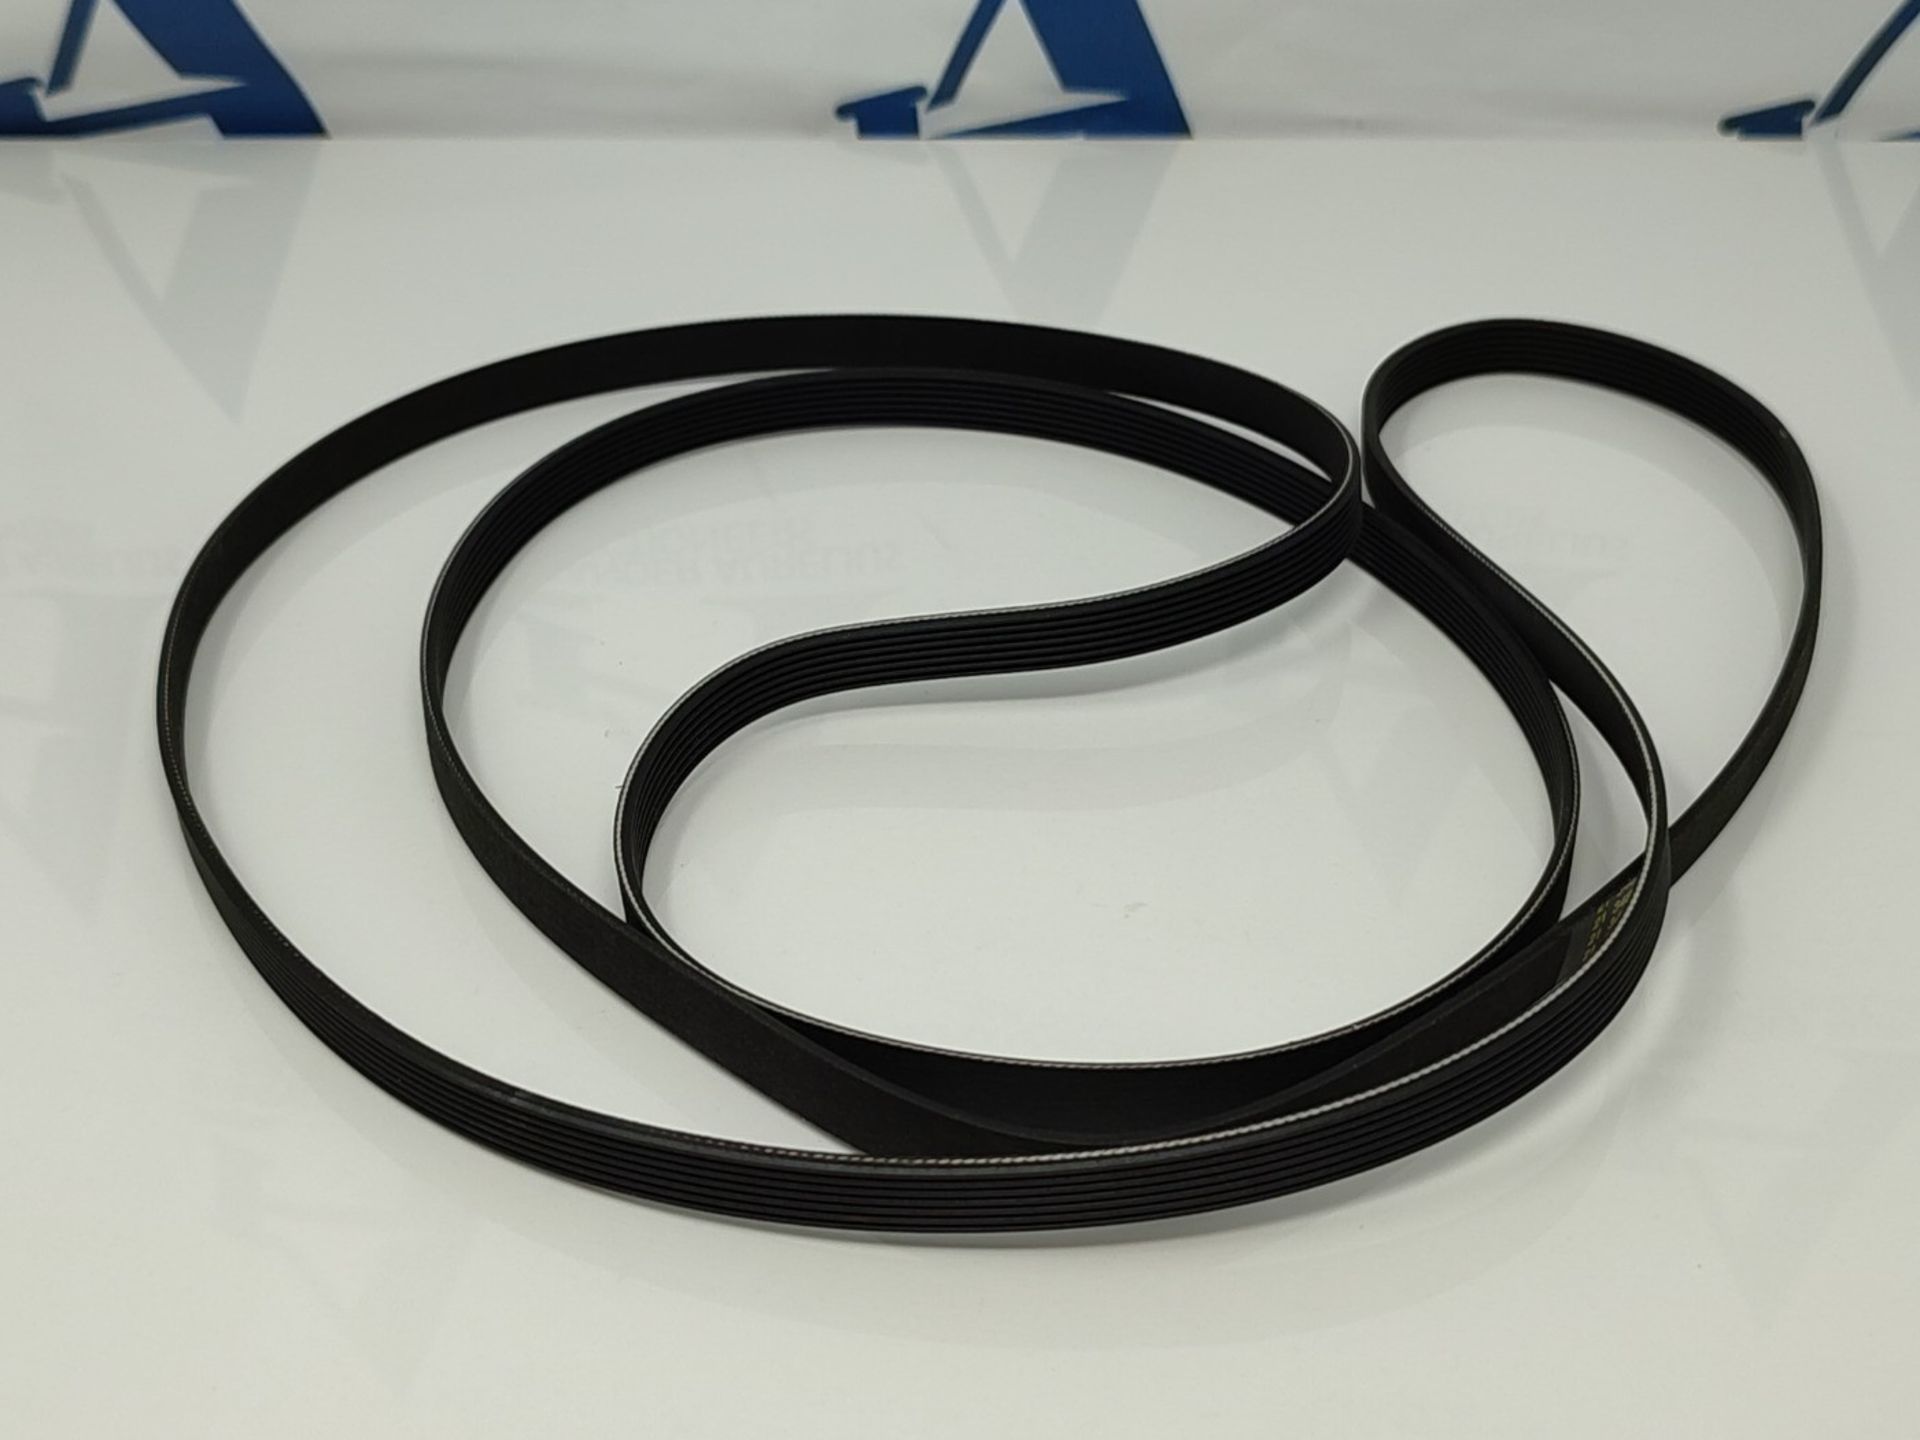 Lichtblau V-ribbed belt 1975H7 / 1975PH7 for tumble dryers, drive belt suitable for AE - Image 2 of 2